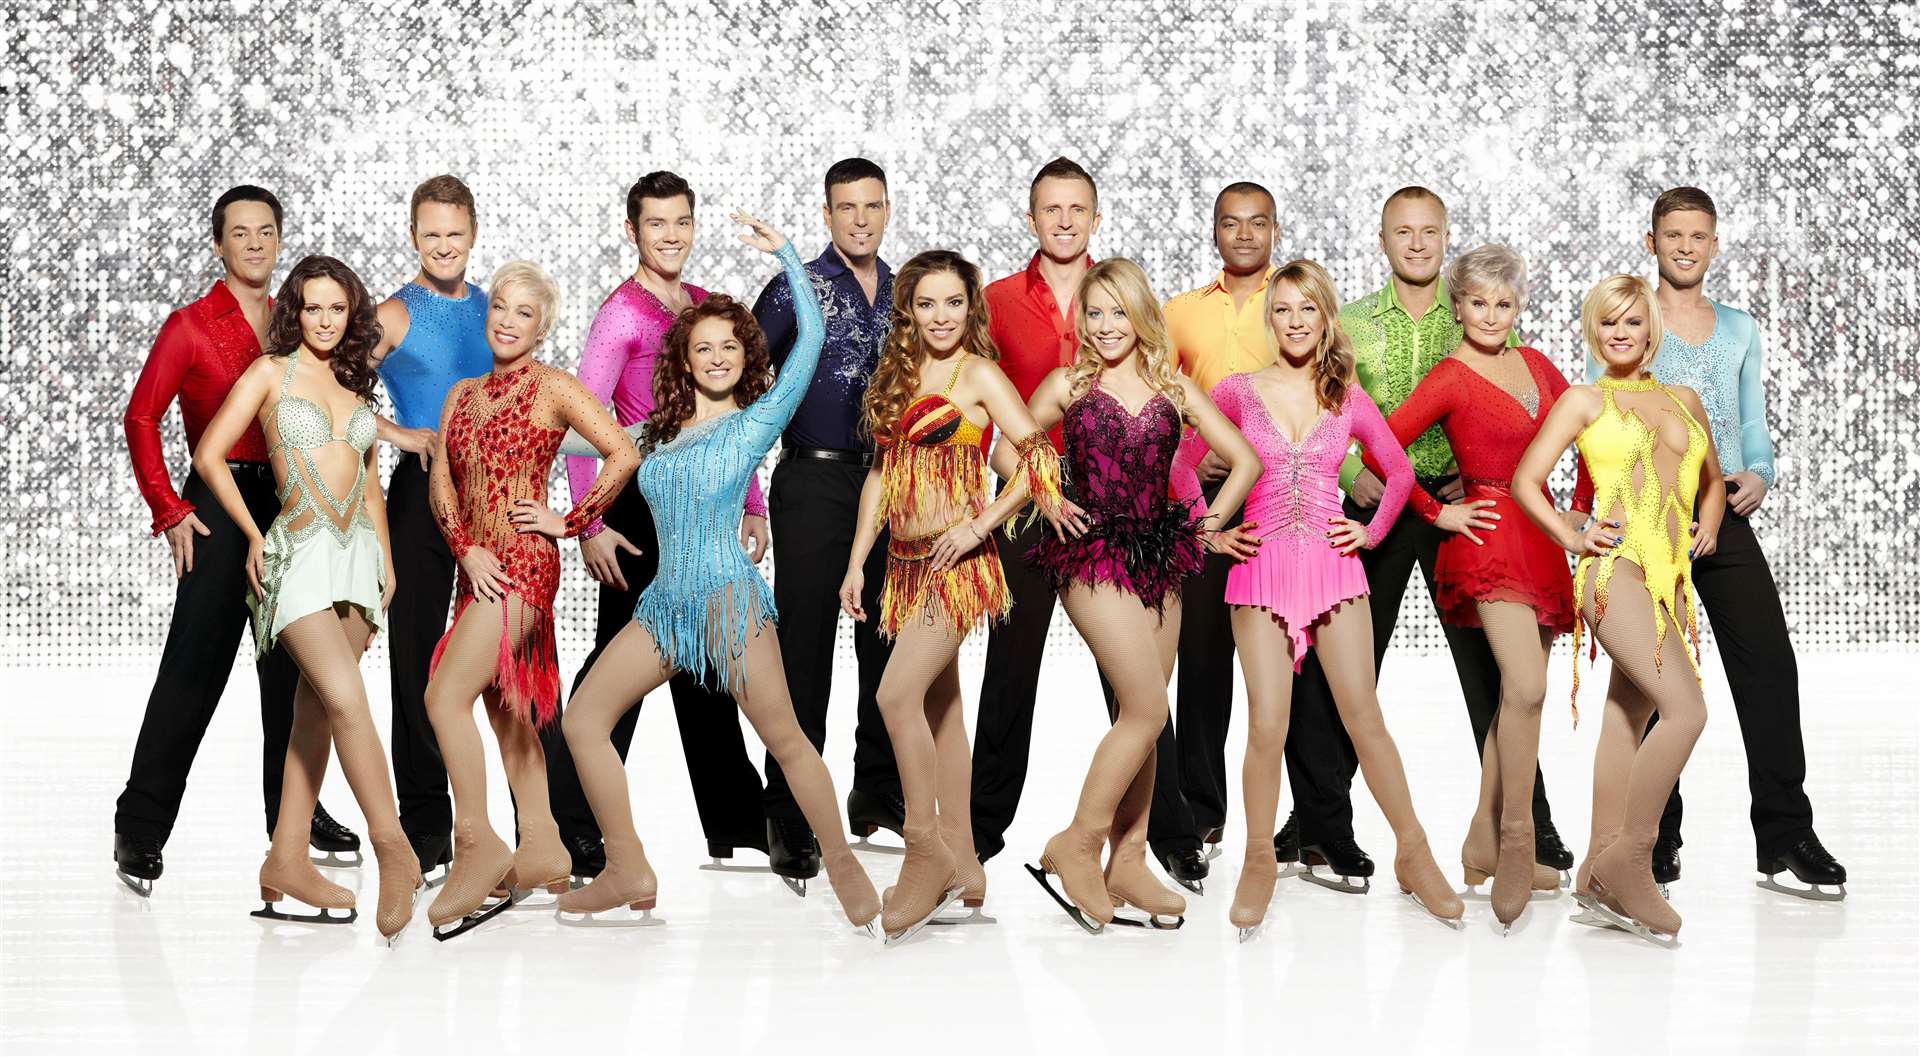 Kerry appeared on Dancing On Ice Picture: ITV, Nicky Johnston